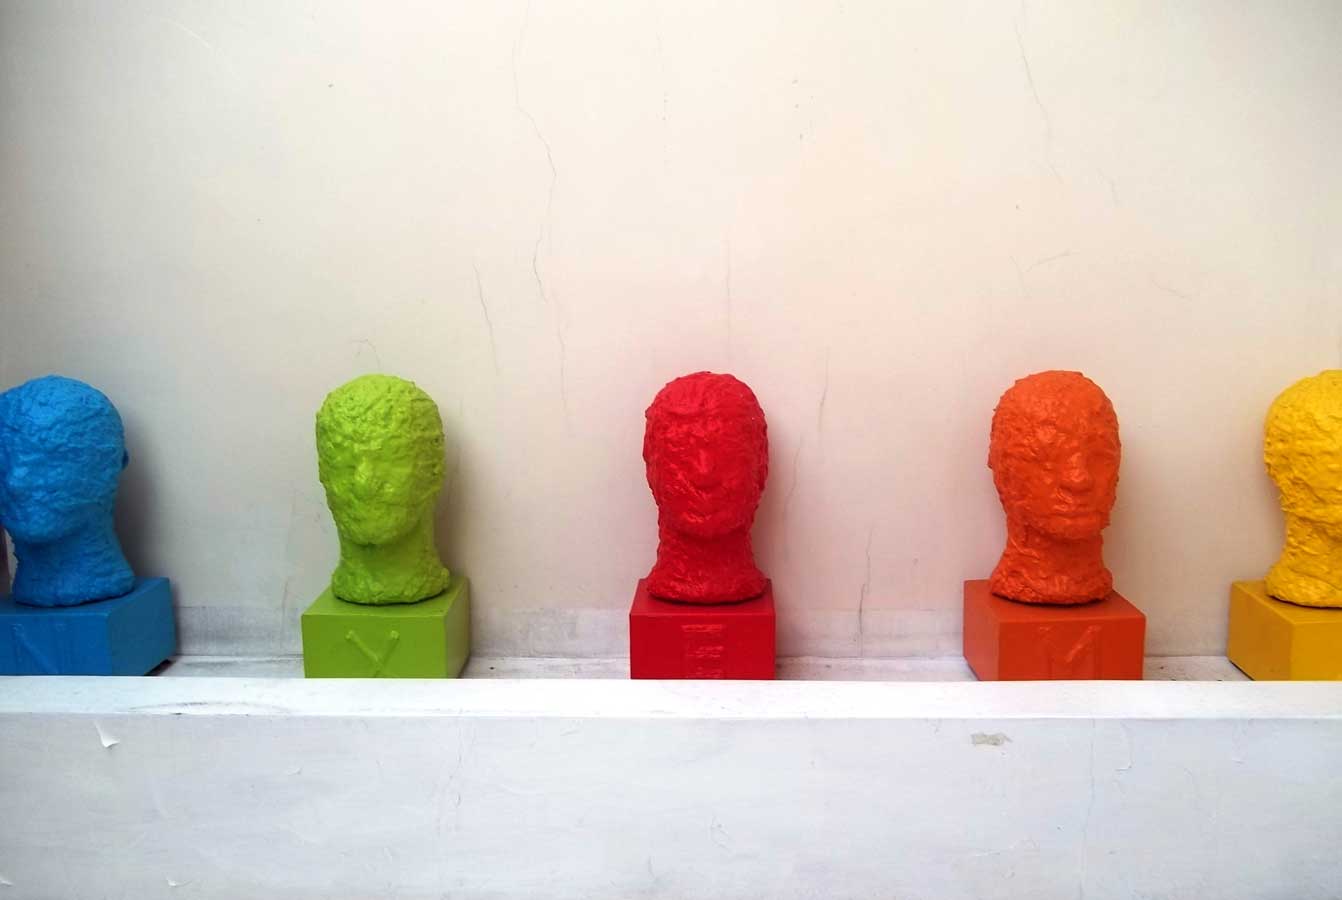 Heads, sculpture by Nicola Guerraz, acrylic on resin and iron, h 50 cm each, 2011, photo 01